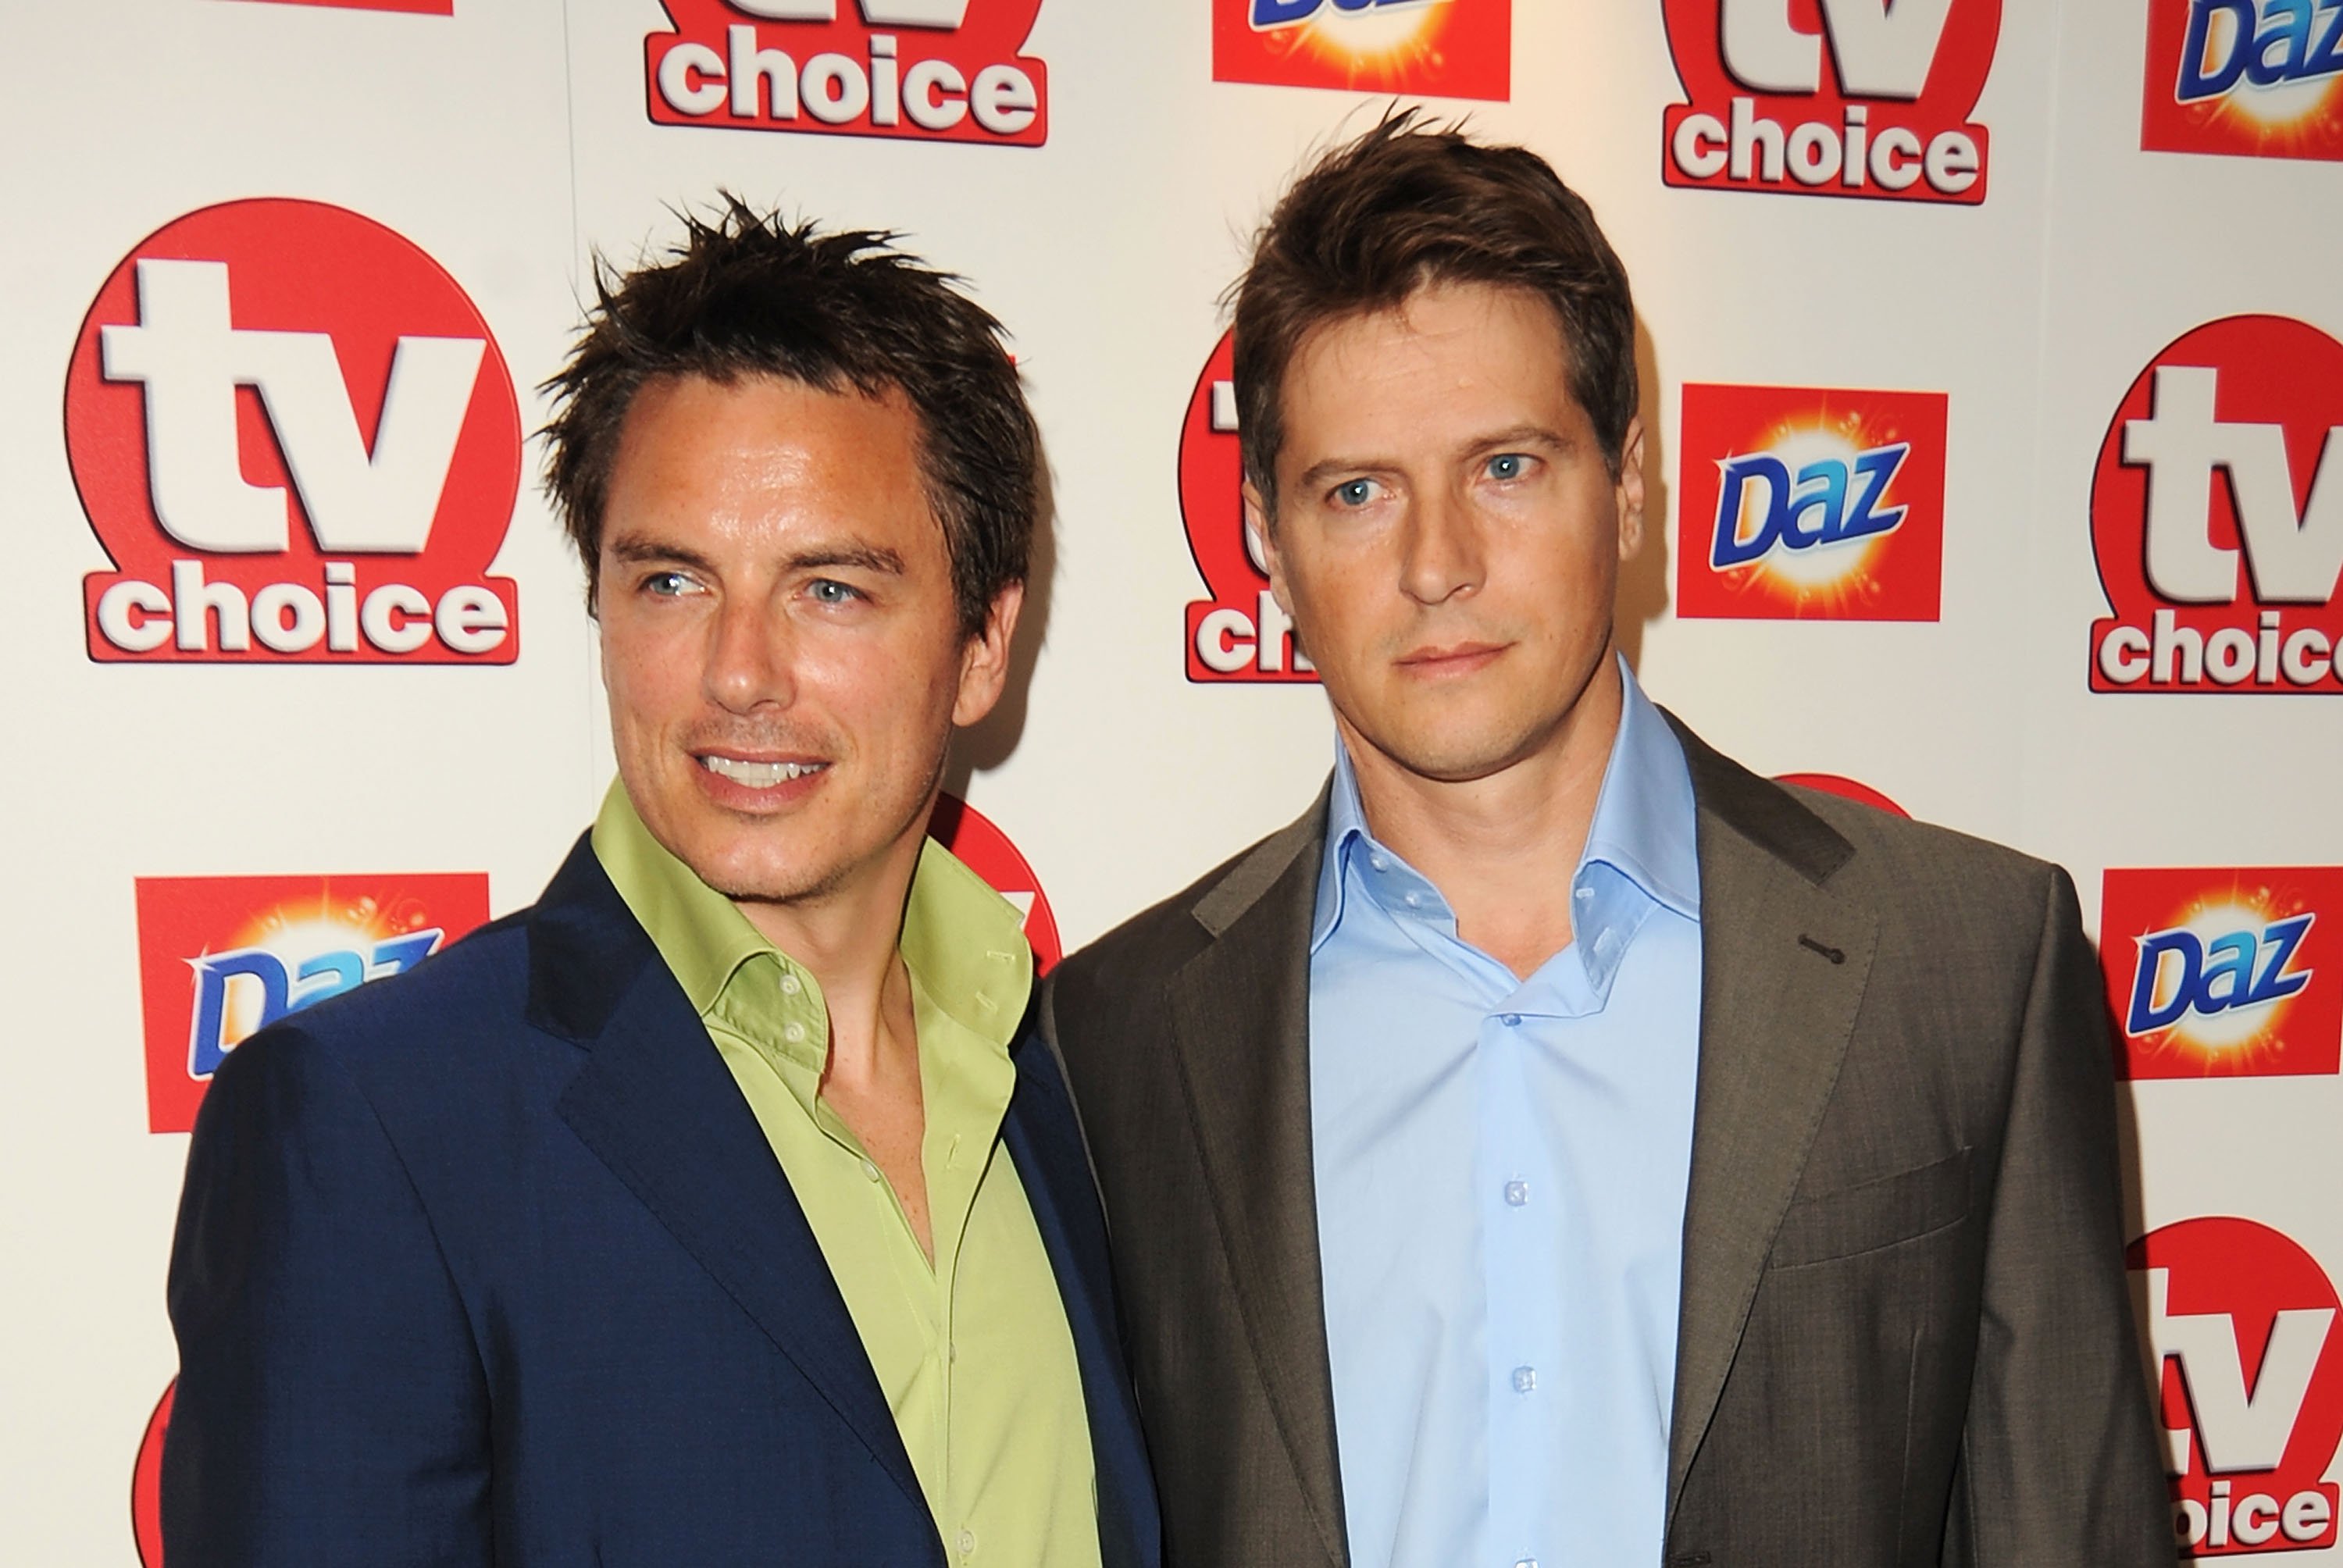 John Barrowman (L) and Scott Gill arrive at the TVChoice Awards 2010 held at The Dorchester, on September 6, 2010 in London, England. | Source Getty Images